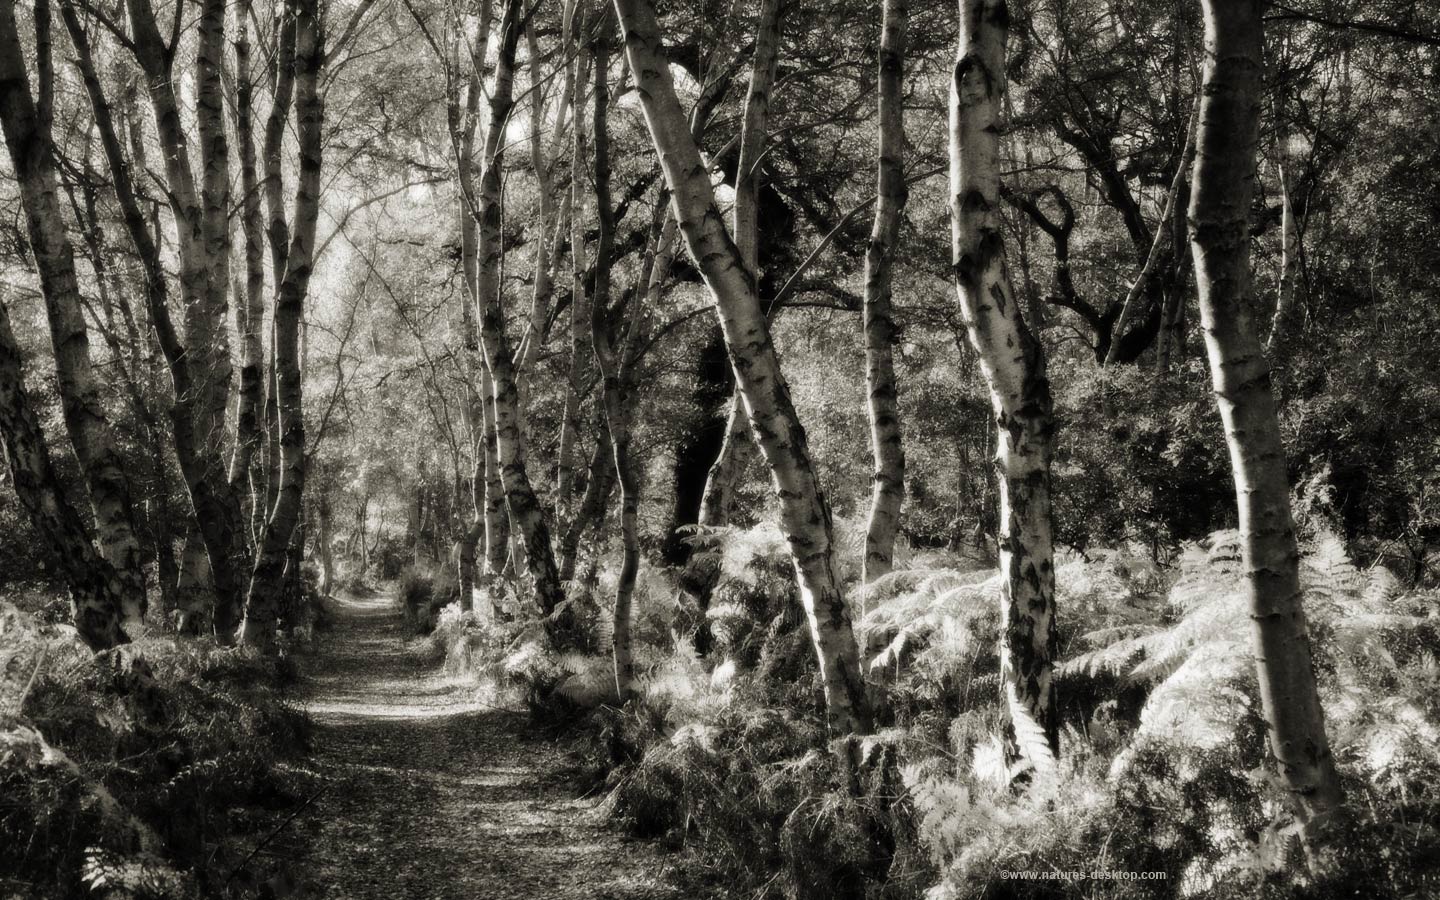 Wallpaper Picture Of A Woodland Path Lined With Silver Birch Trees